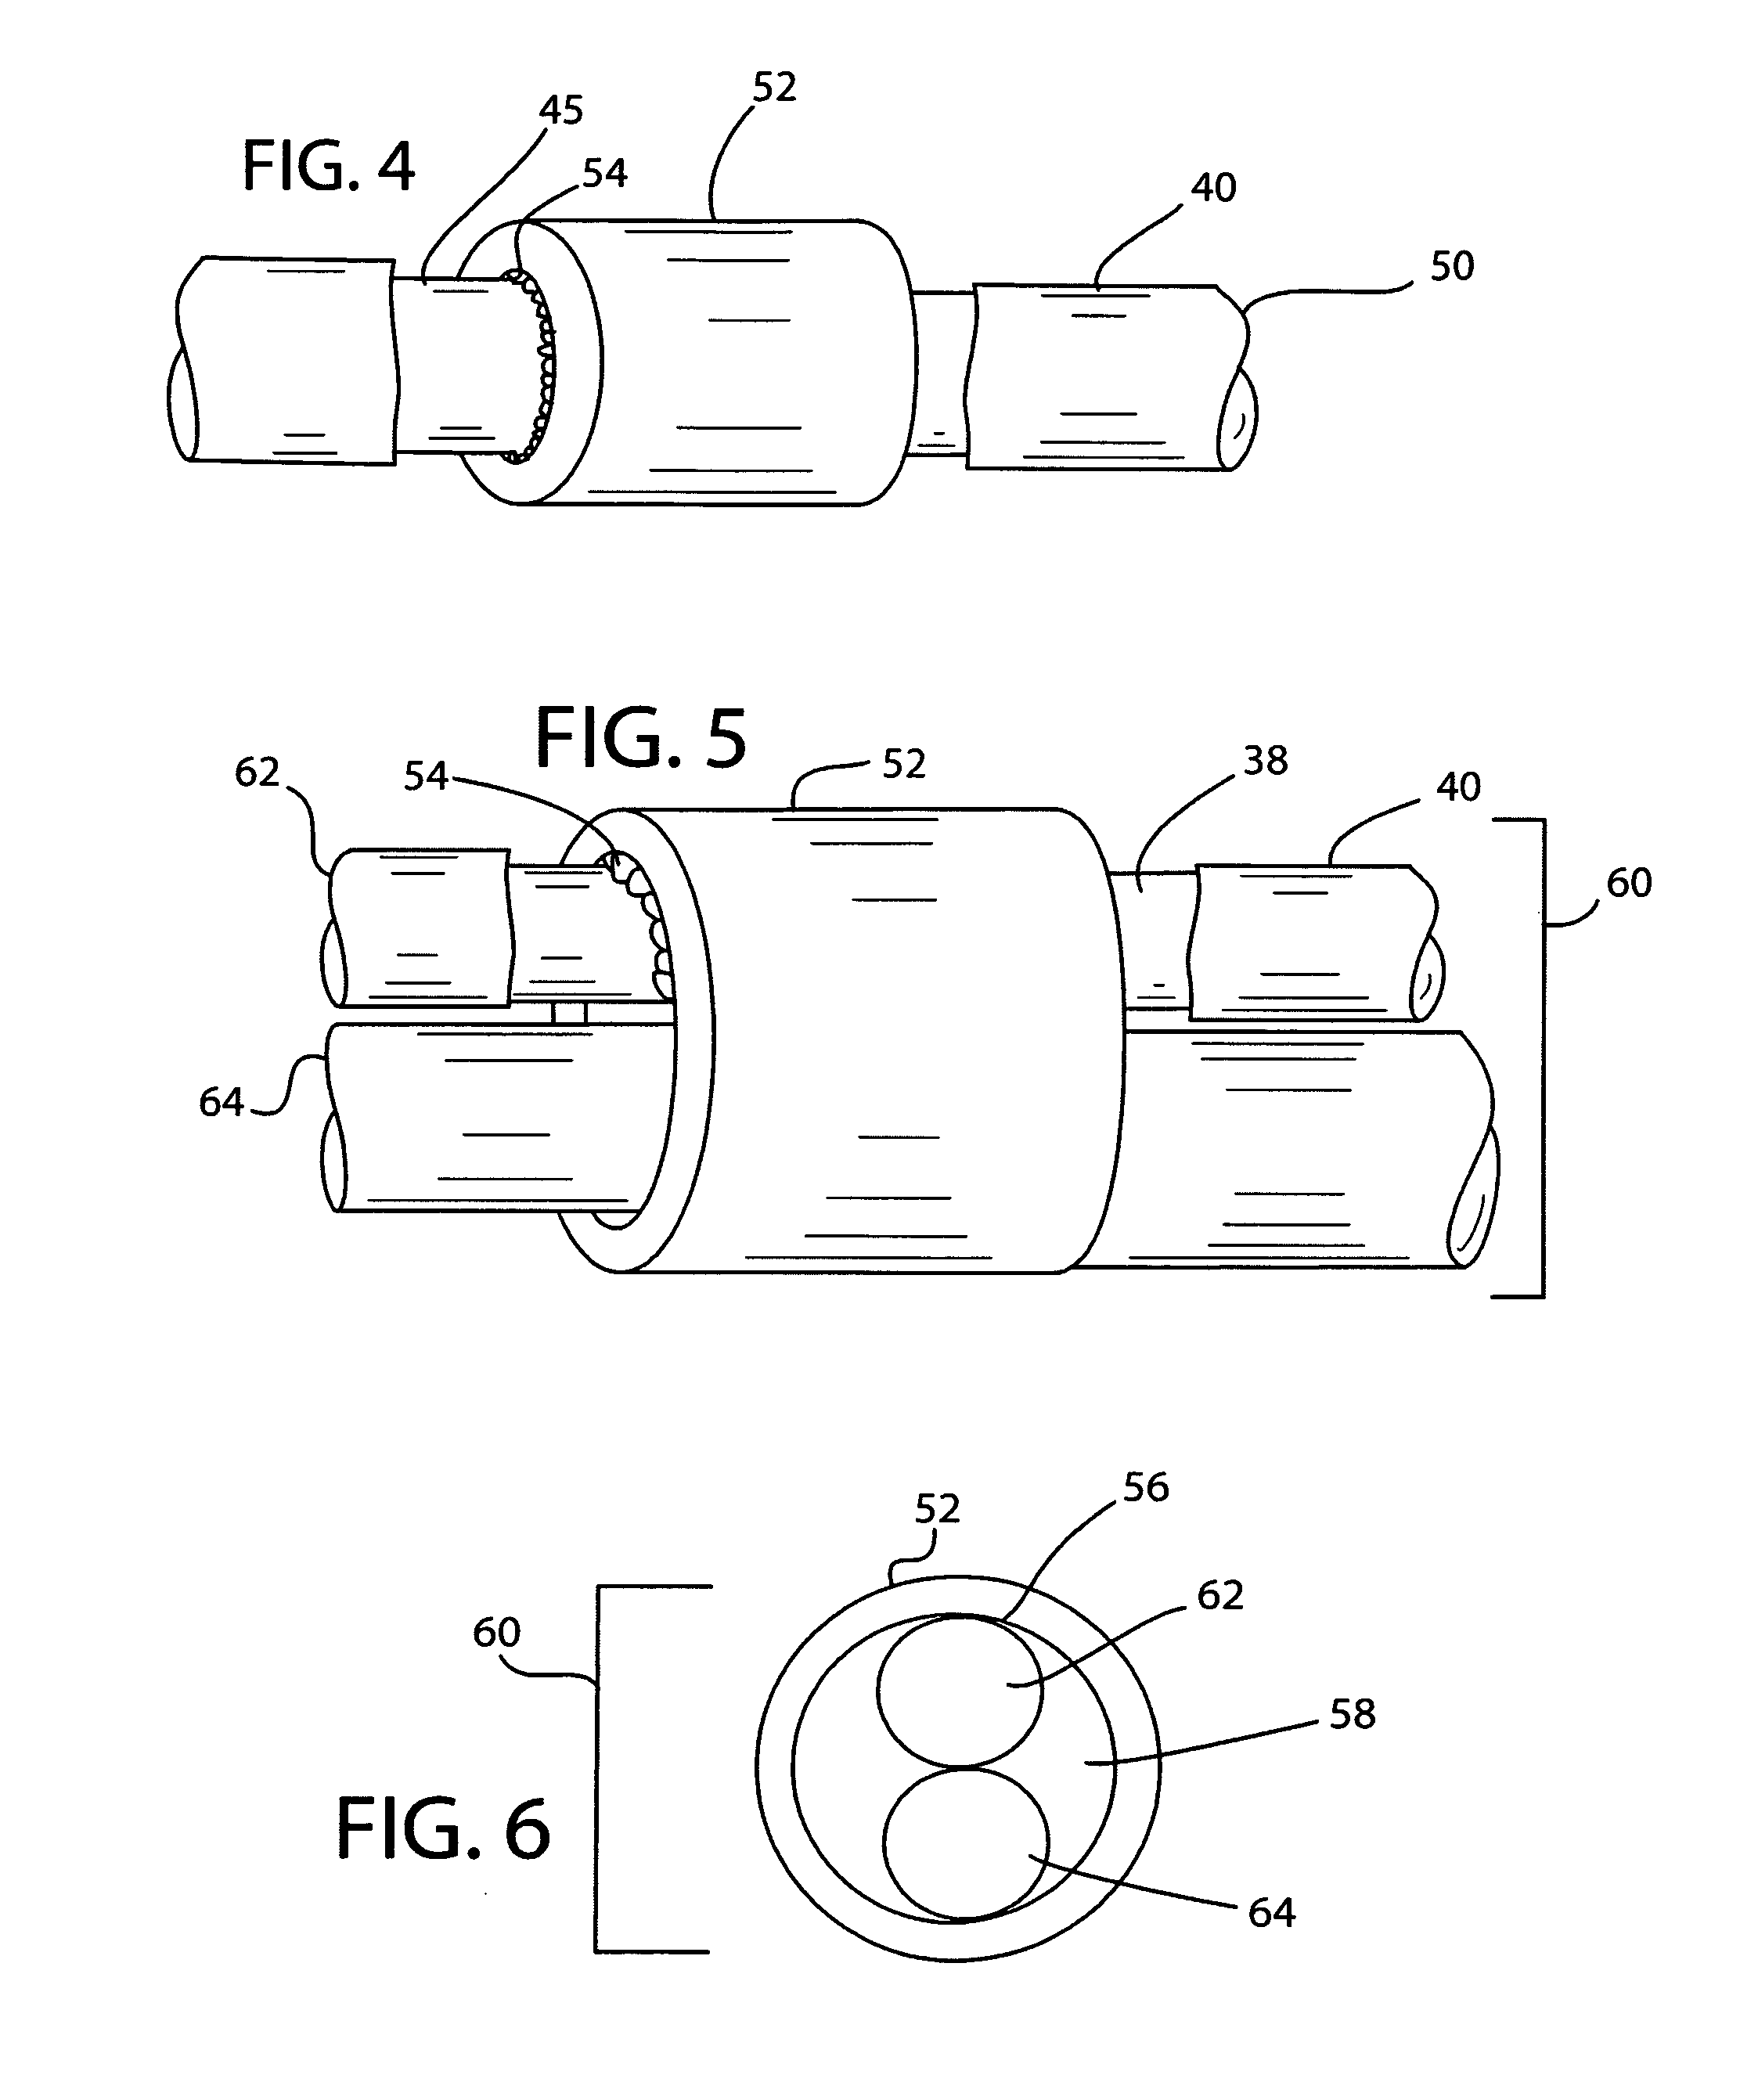 Electrode and connector attachments for a cylindrical glass fiber wire lead